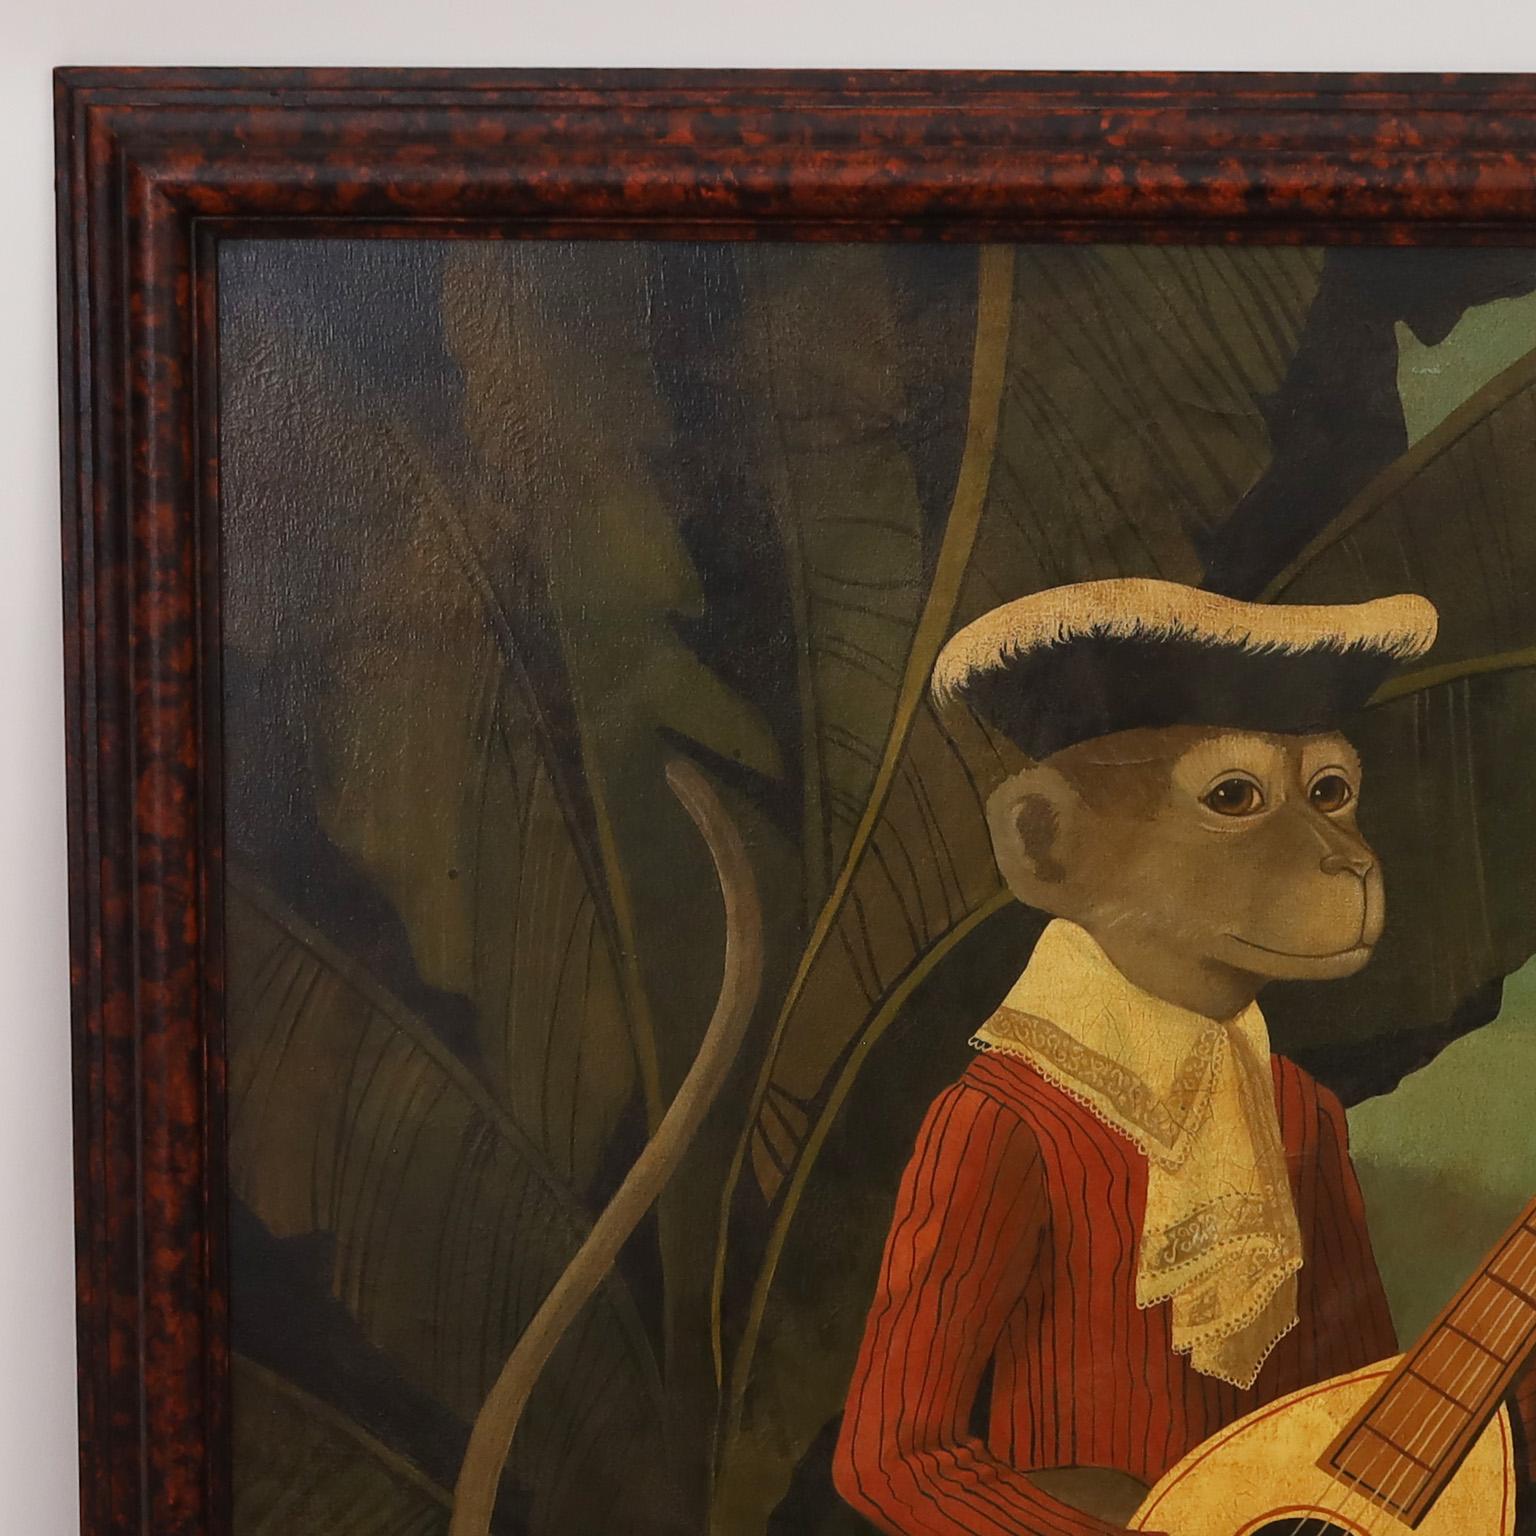 Fanciful oil painting on canvas depicting two well dressed monkeys in a jungle setting, one with a lute and one with parrots, executed in a tongue in cheek Victorian parlor painting style. Signed Skilling in the lower right.